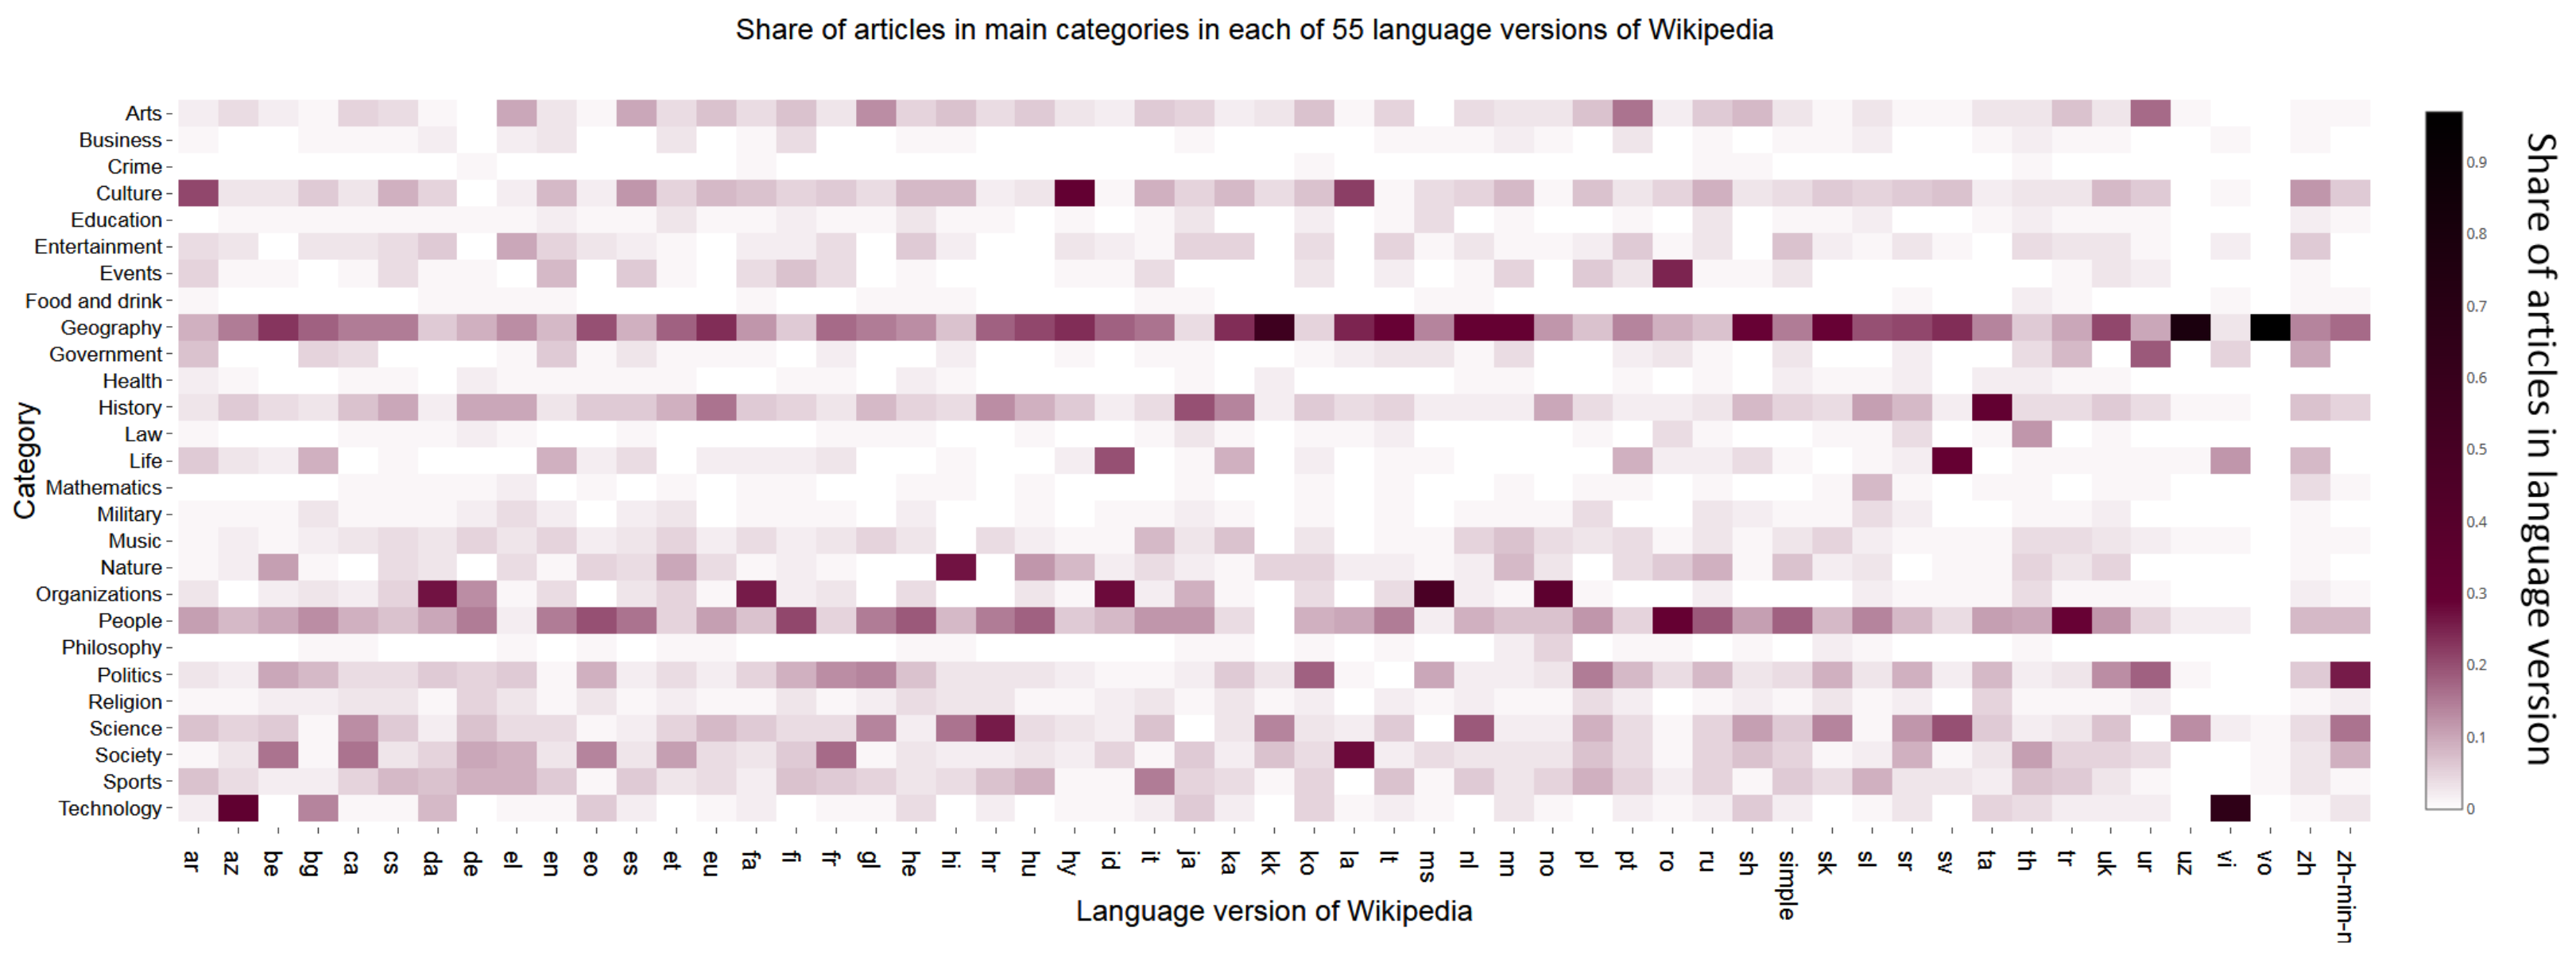 Computers Free Full Text Multilingual Ranking Of Wikipedia Articles With Quality And Popularity Assessment In Different Topics Html